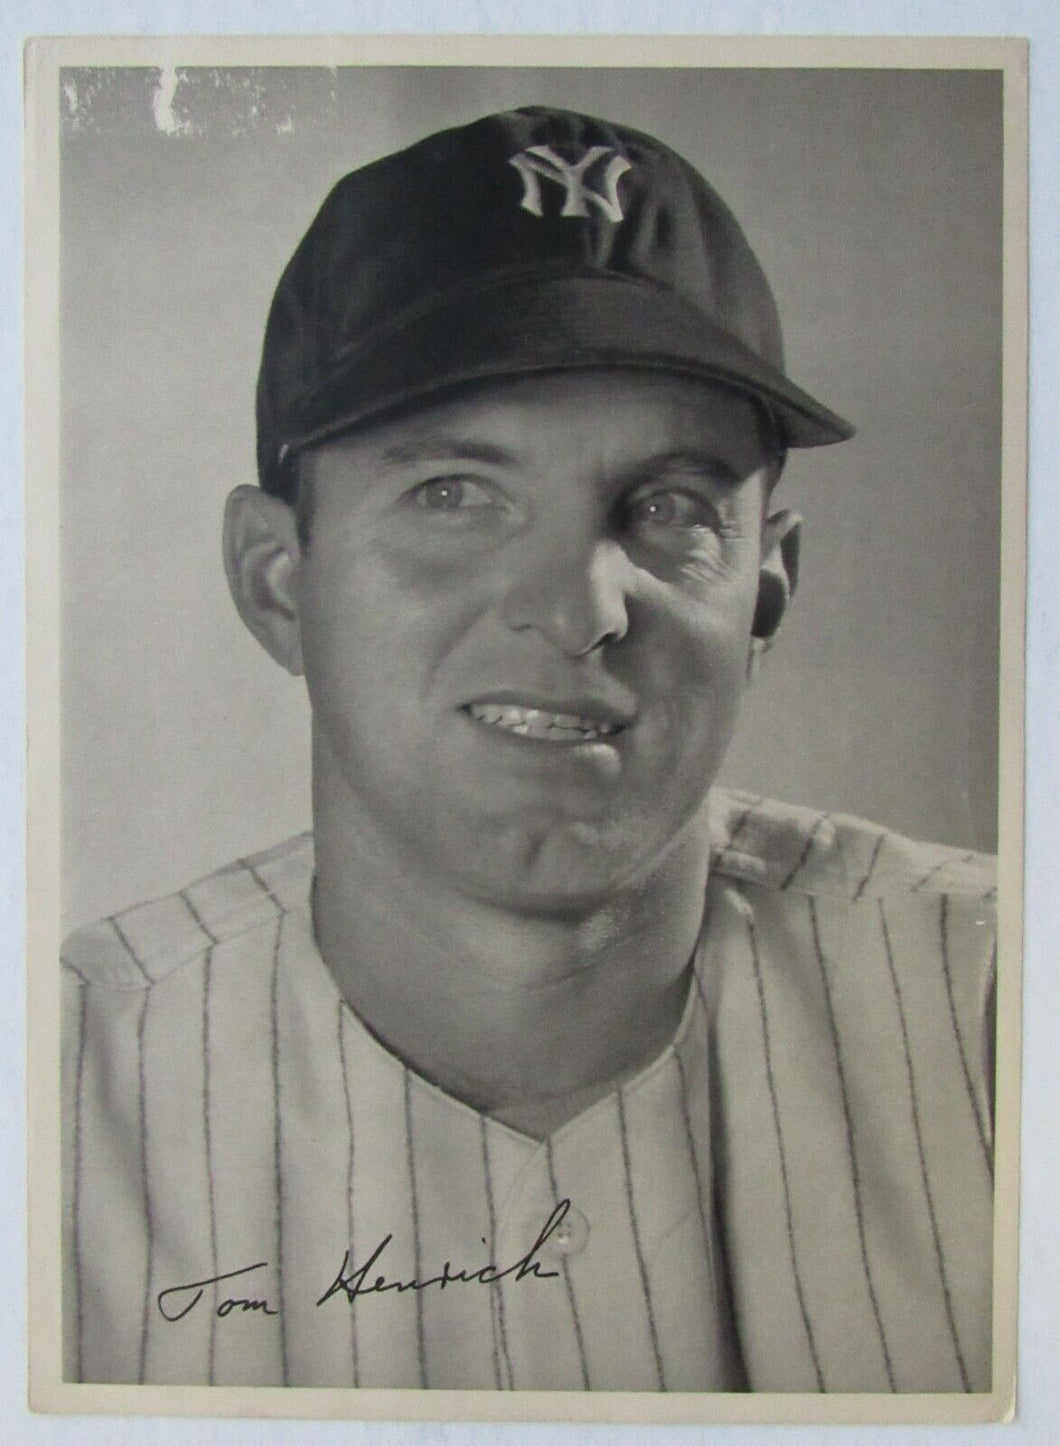 Circa 1947 Vintage MLB NY Yankees Outfield Great Tommy Henrich Team Issued Photo